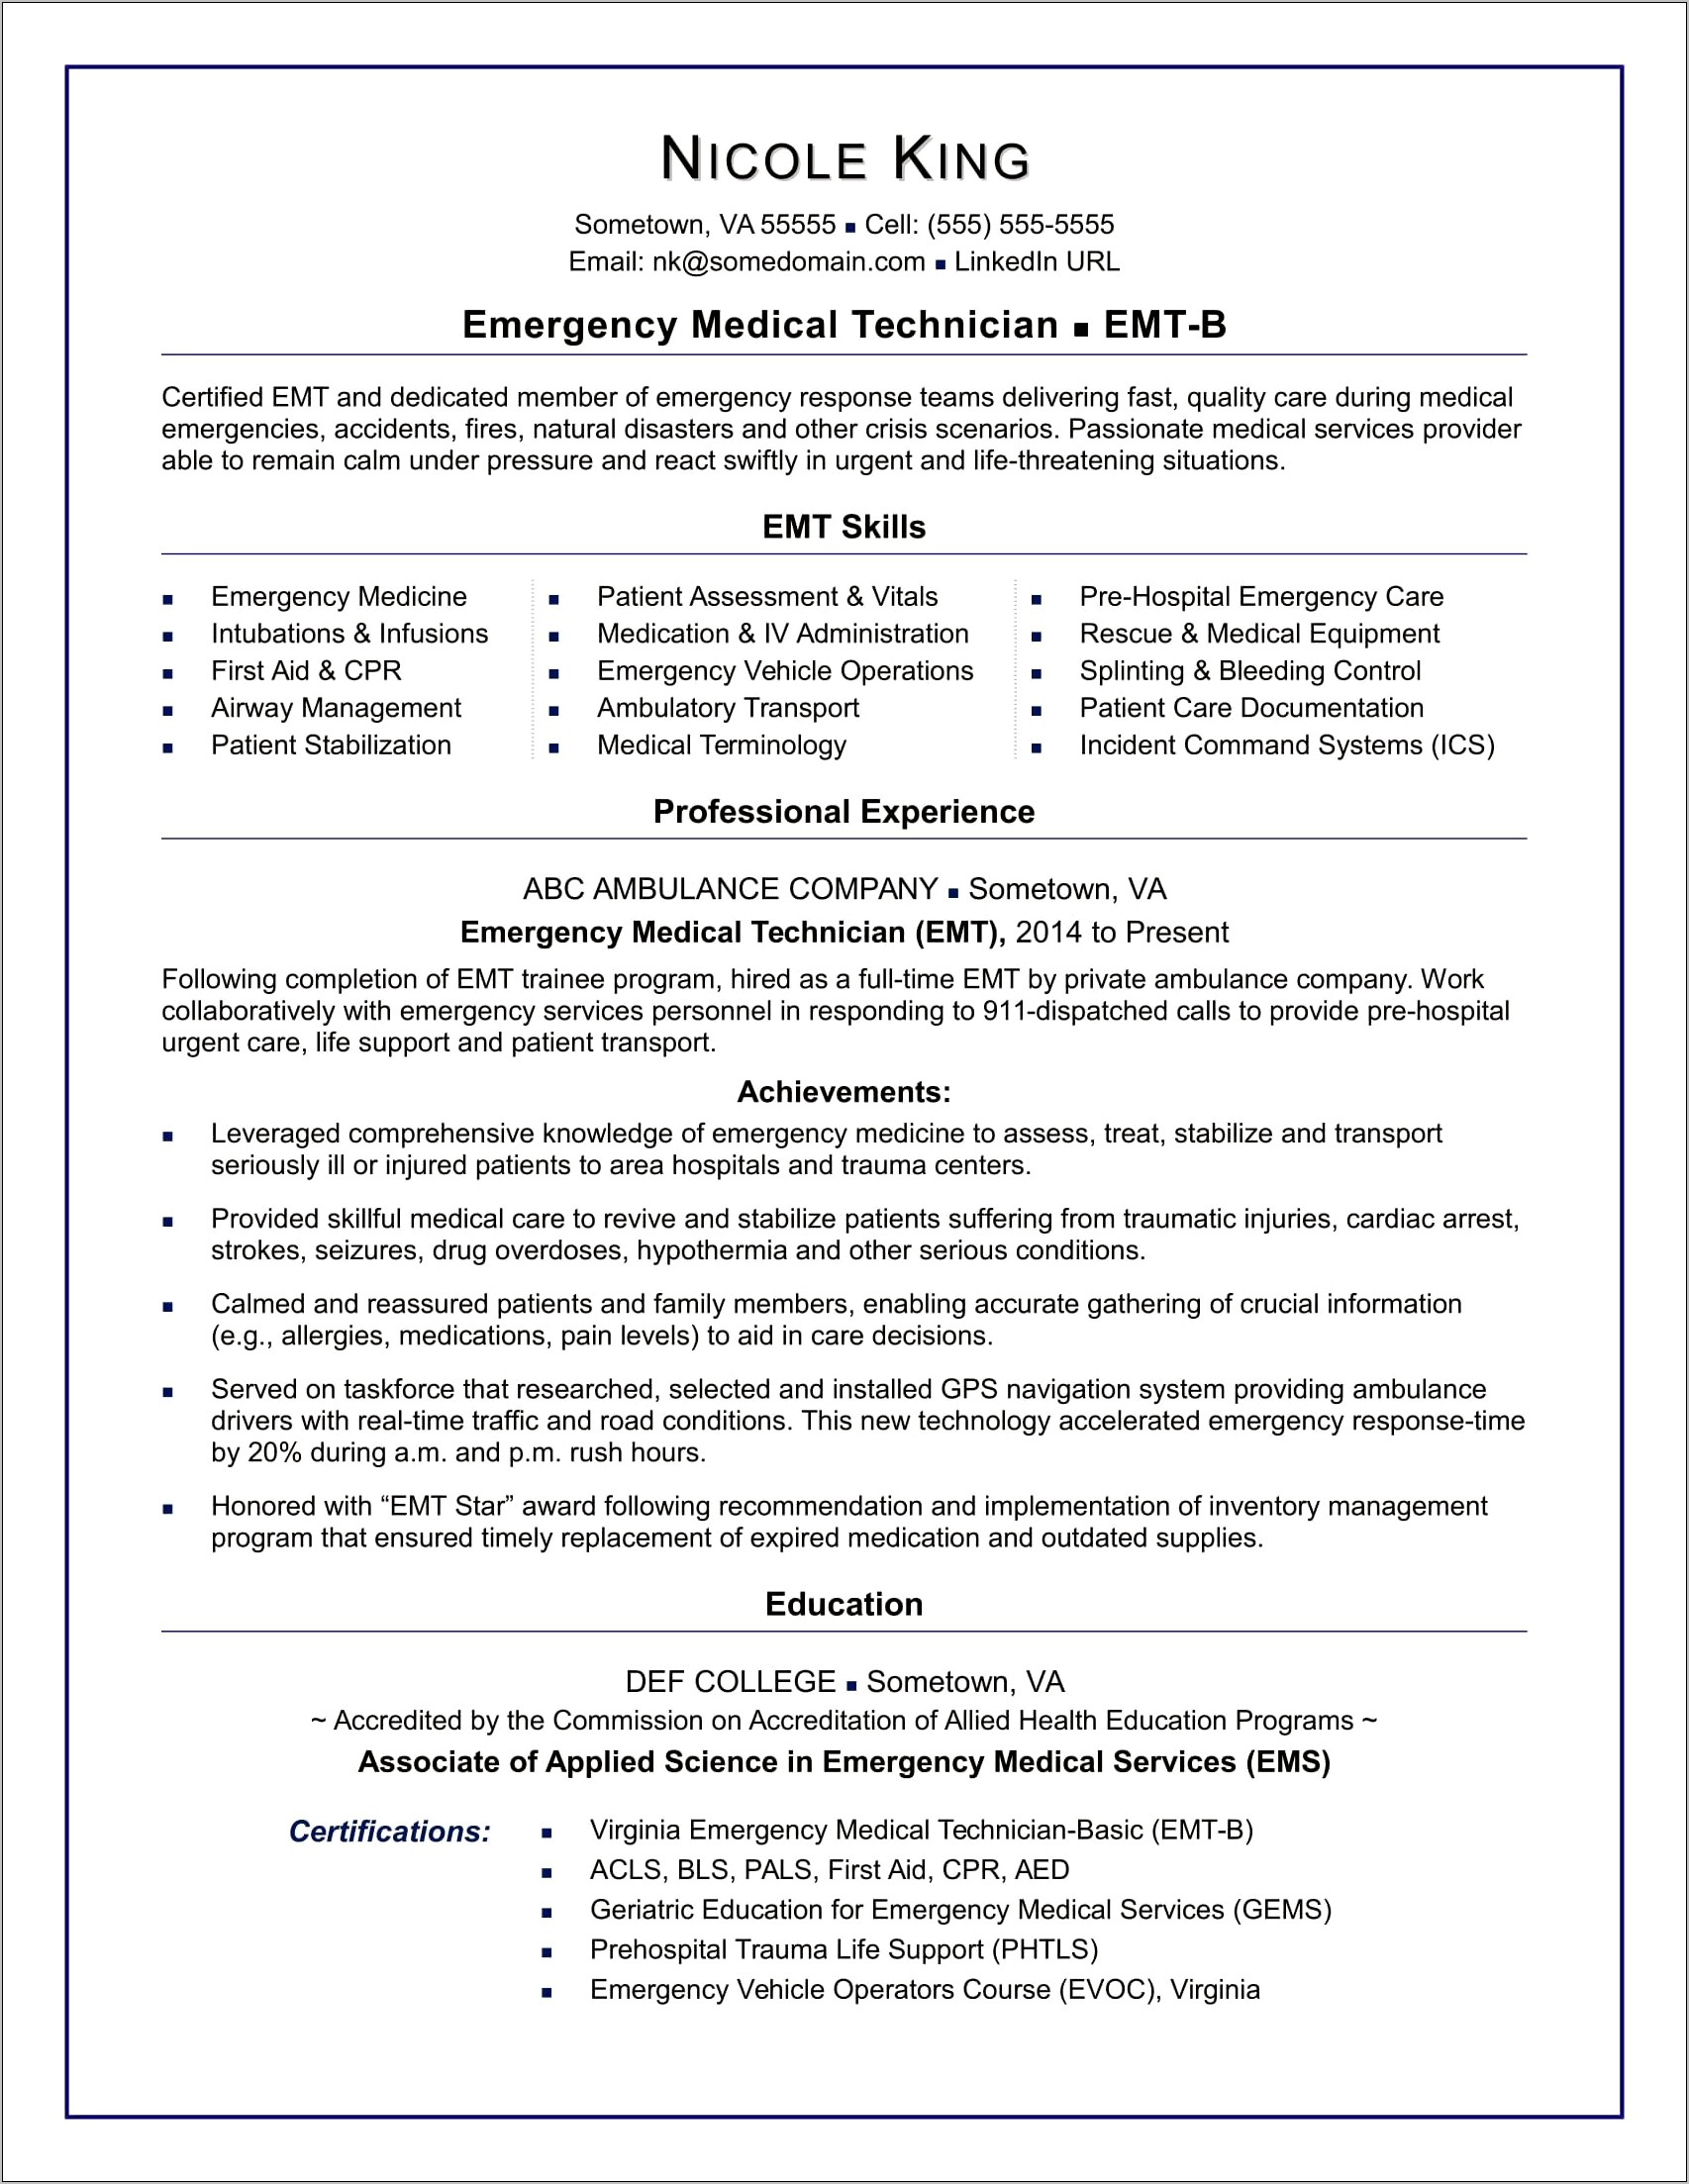 Resume Objective Examples Medical Technologist